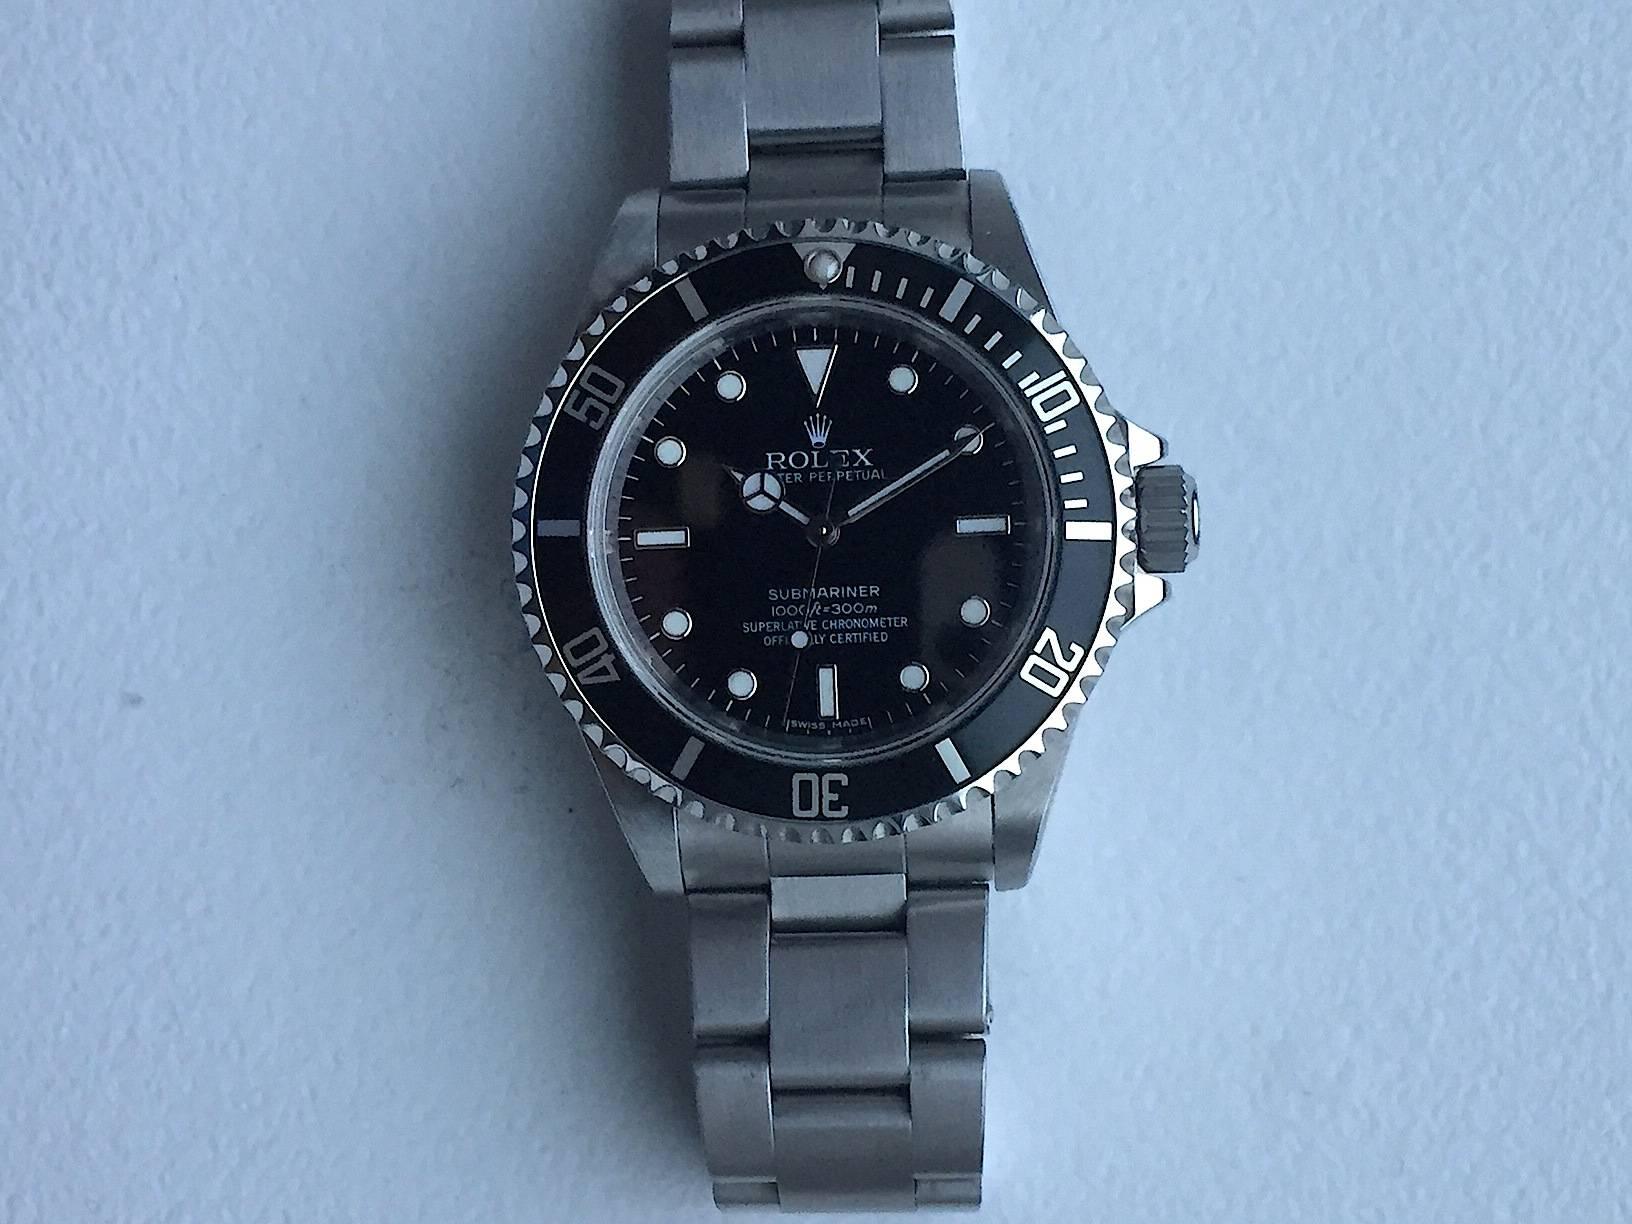 Rolex Stainless Steel Oyster Perpetual Submariner Superlative Chronomter Writwatch
Factory Black Gloss Dial with Luminous Markers
Black Rotating Bezel
40mm in Size
Chronometer Movement
Inner Engraved Bezel
Rolex Calibre 3130M Movement 
Sapphire